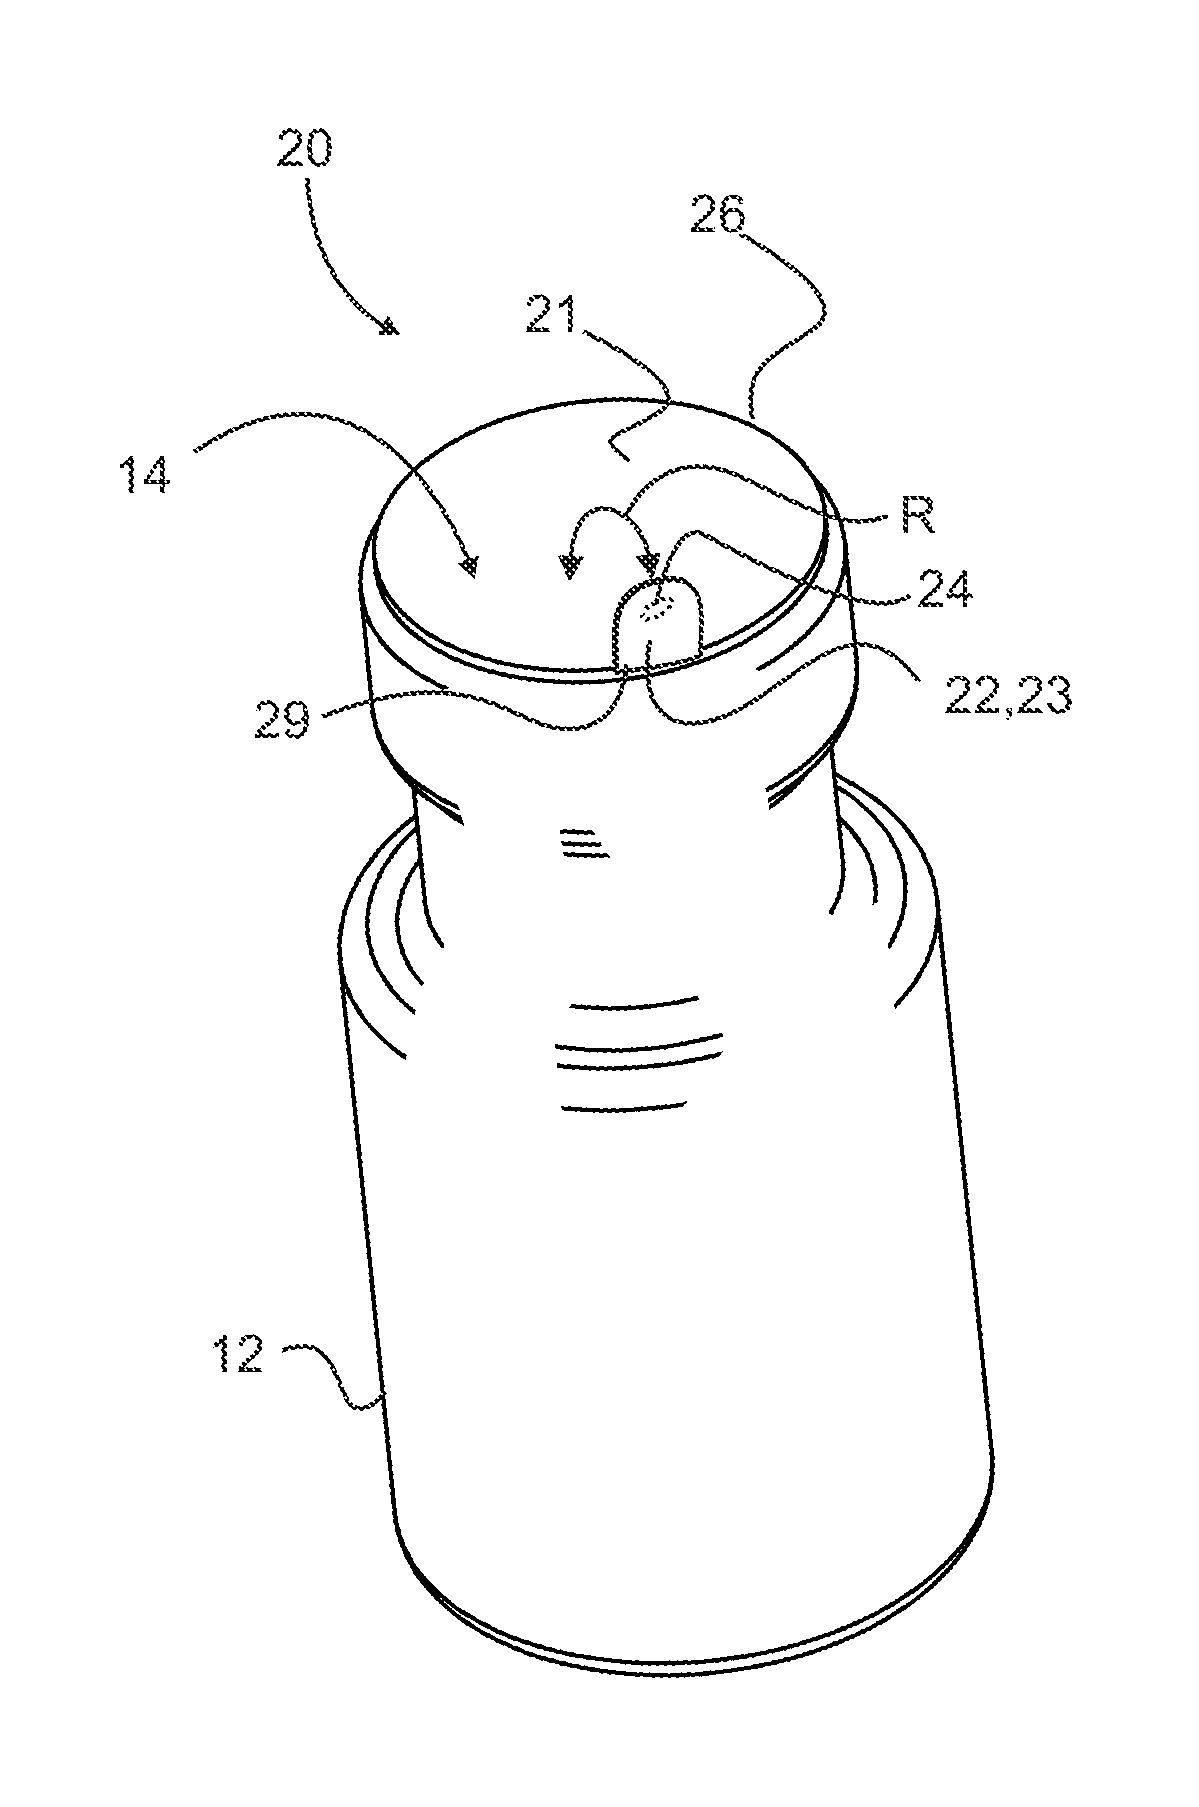 Rim tabbed drizzle safety seal and methods of use